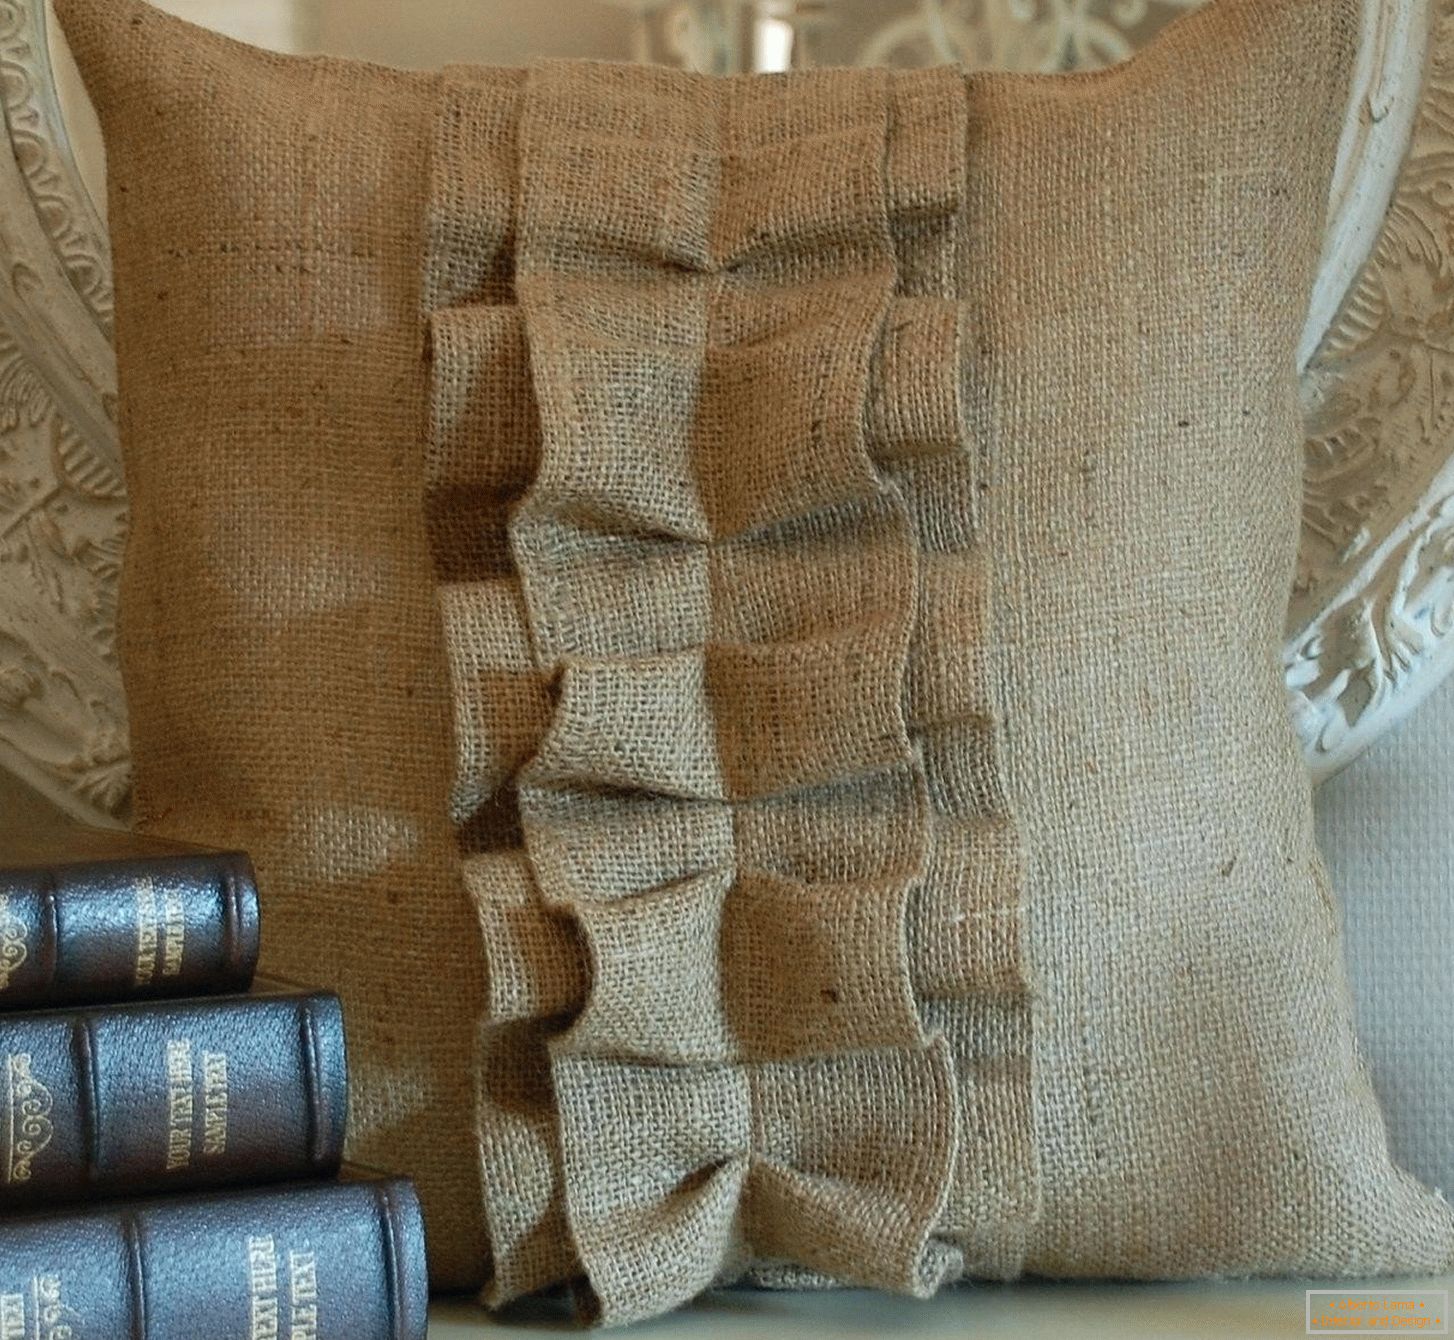 Books and a bag of burlap